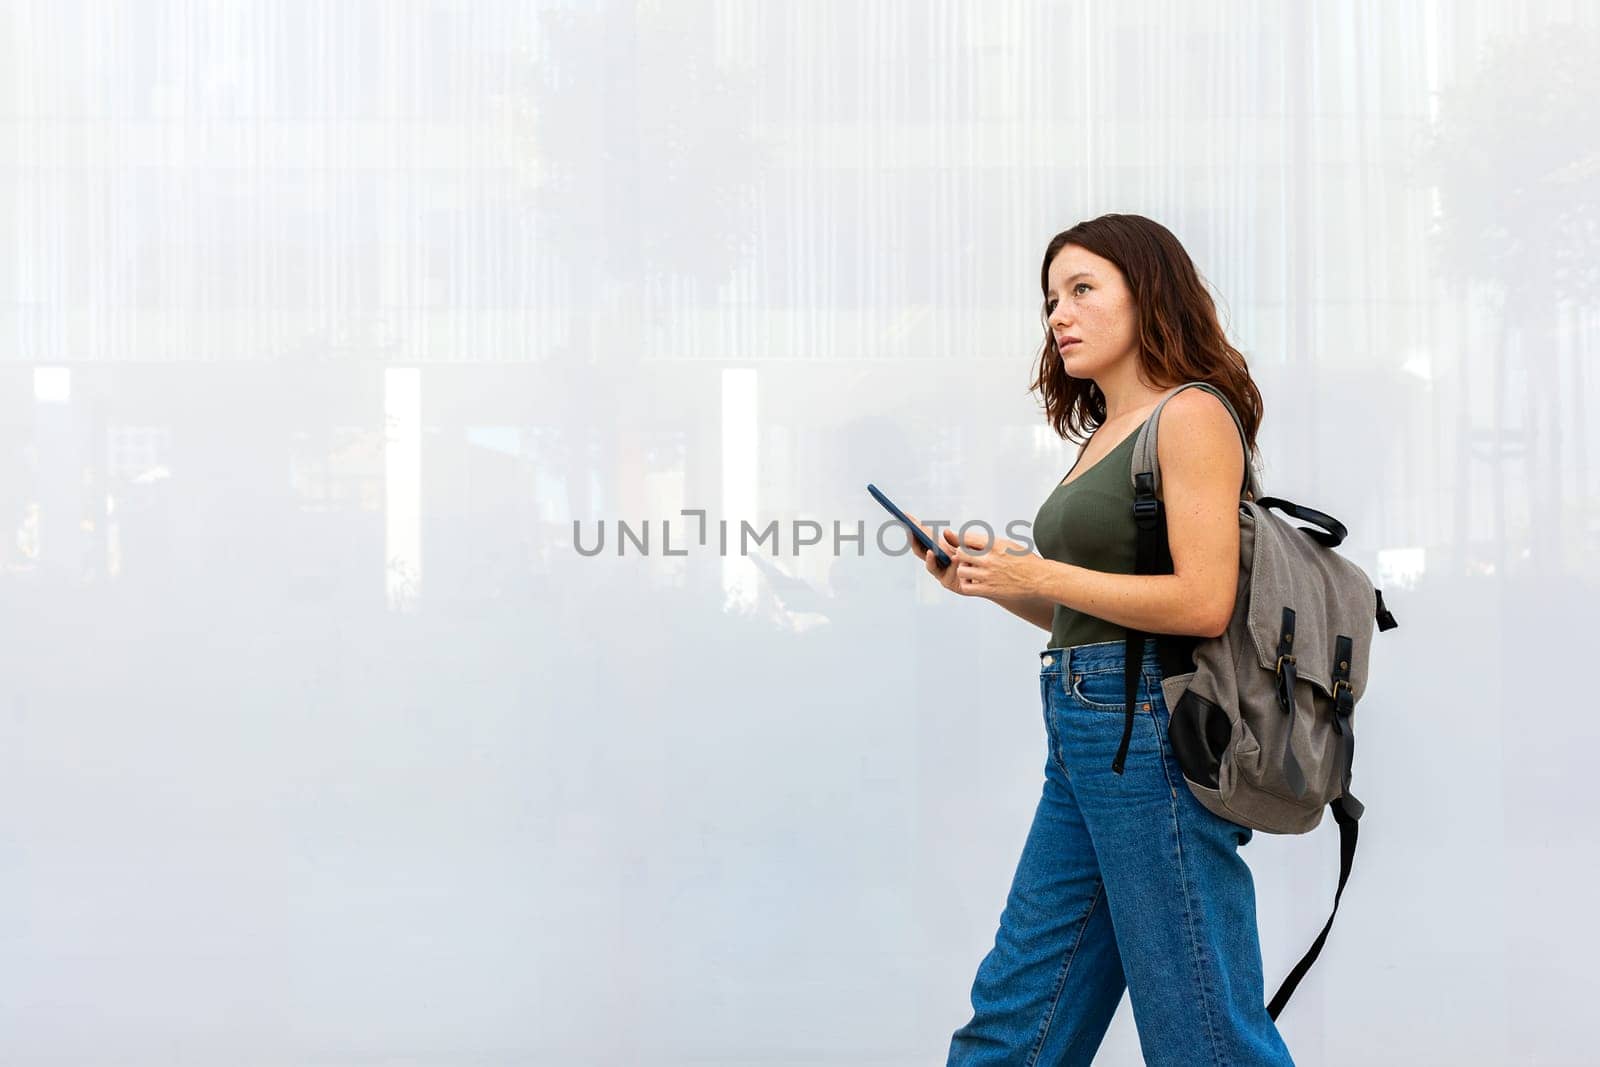 Female university student with backpack walking to class in college campus. Young redhead woman in city street using mobile phone. Copy space. Education and technology concepts.